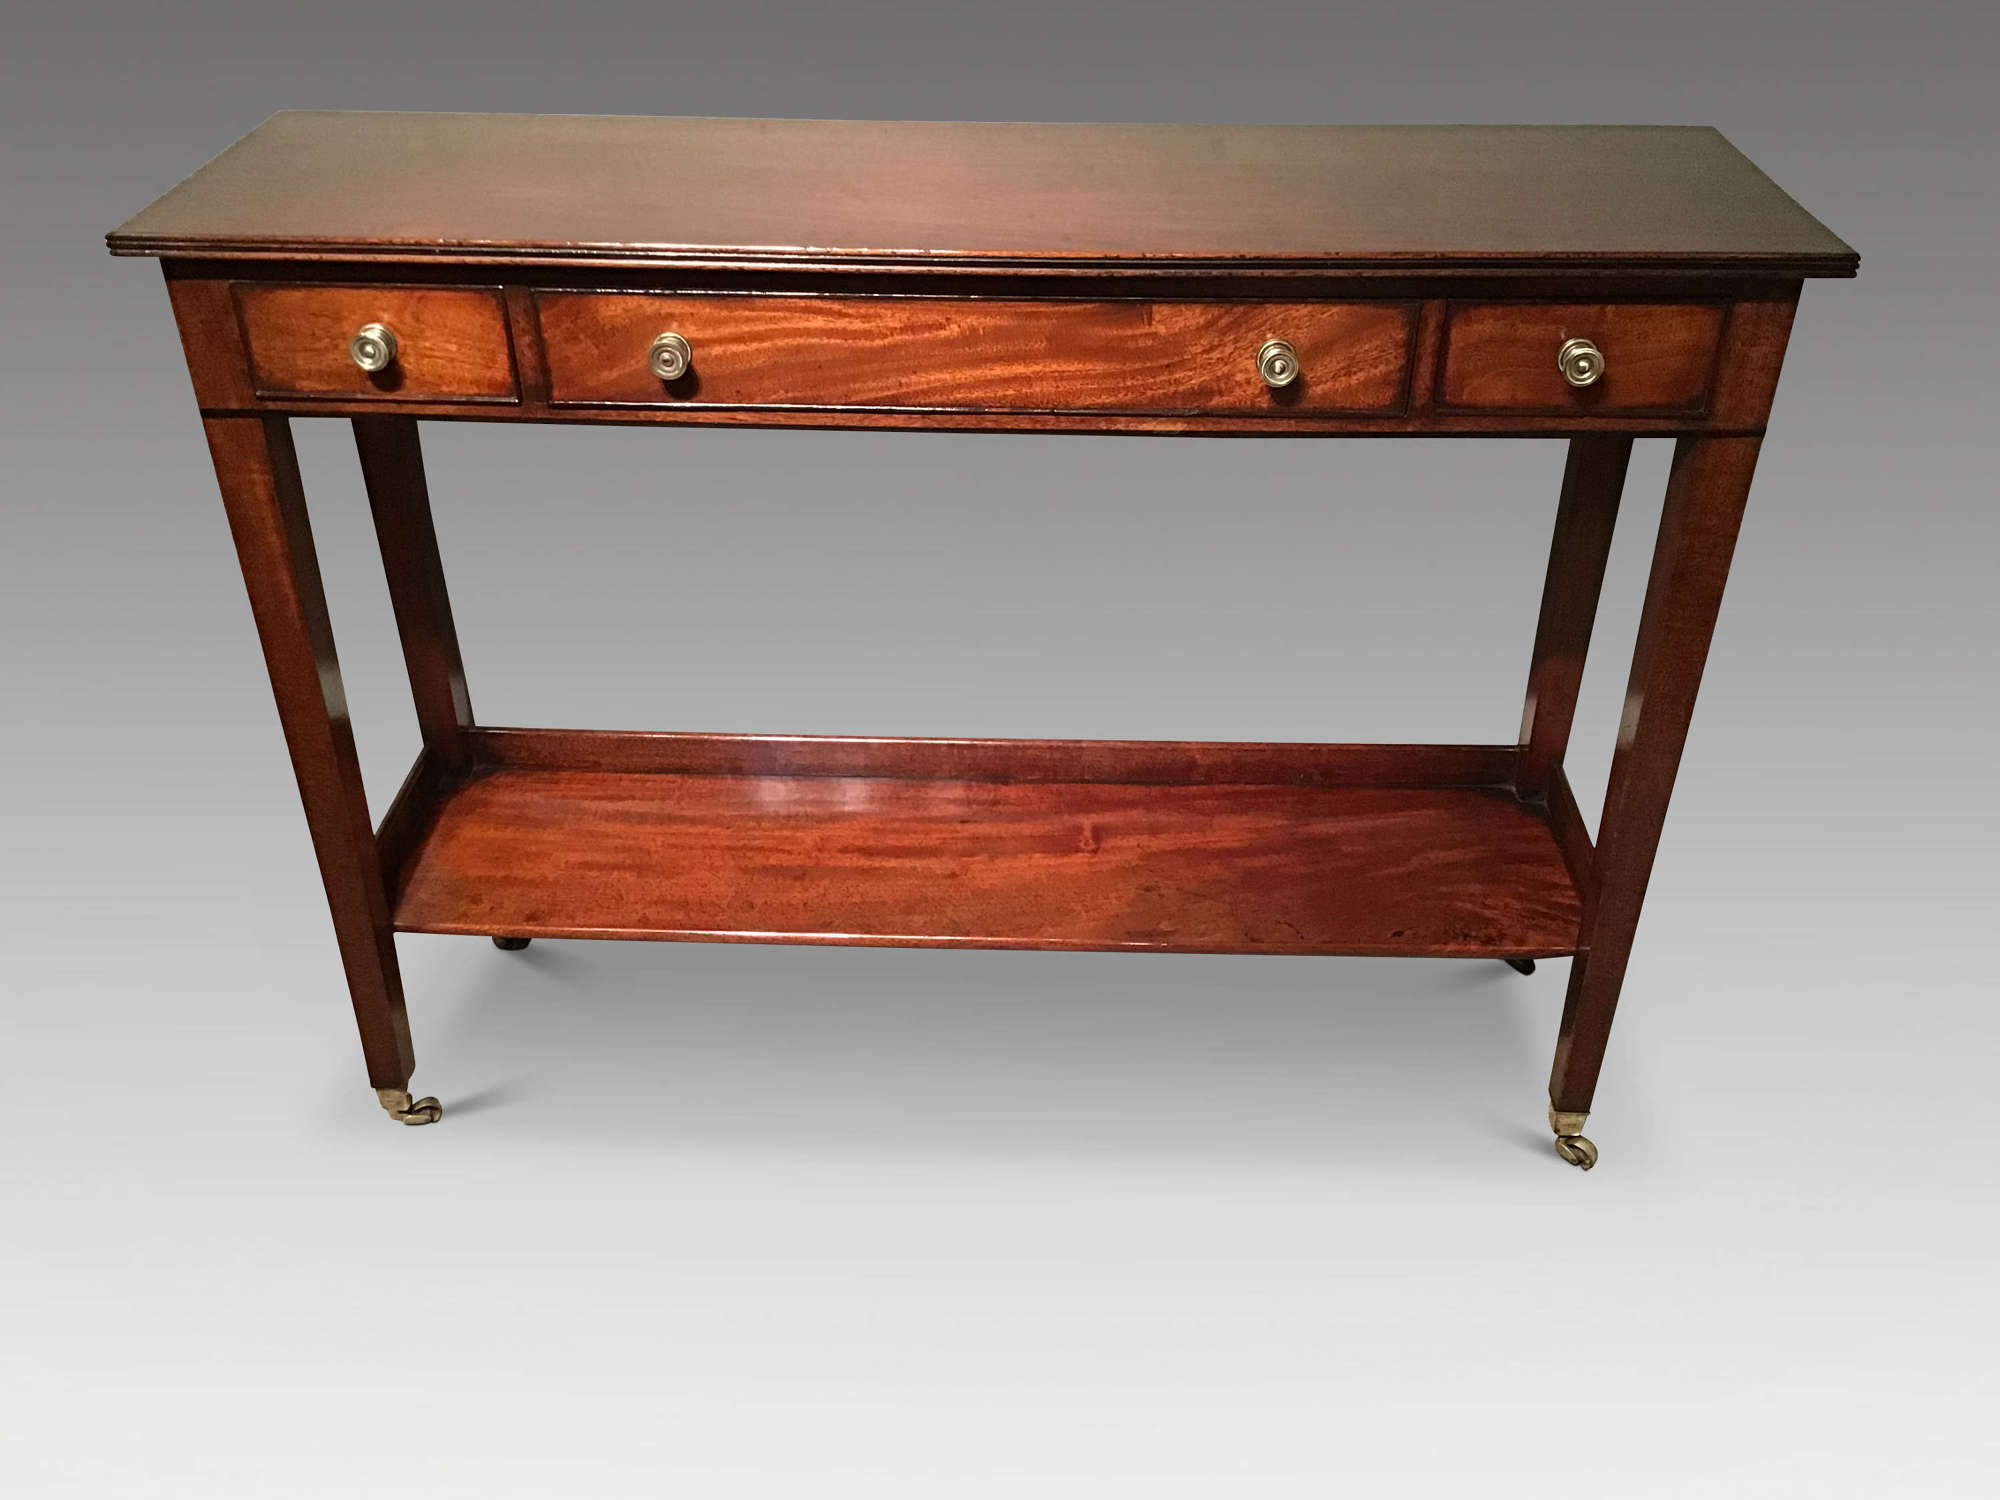 Shallow antique mahogany two tier sidetable.